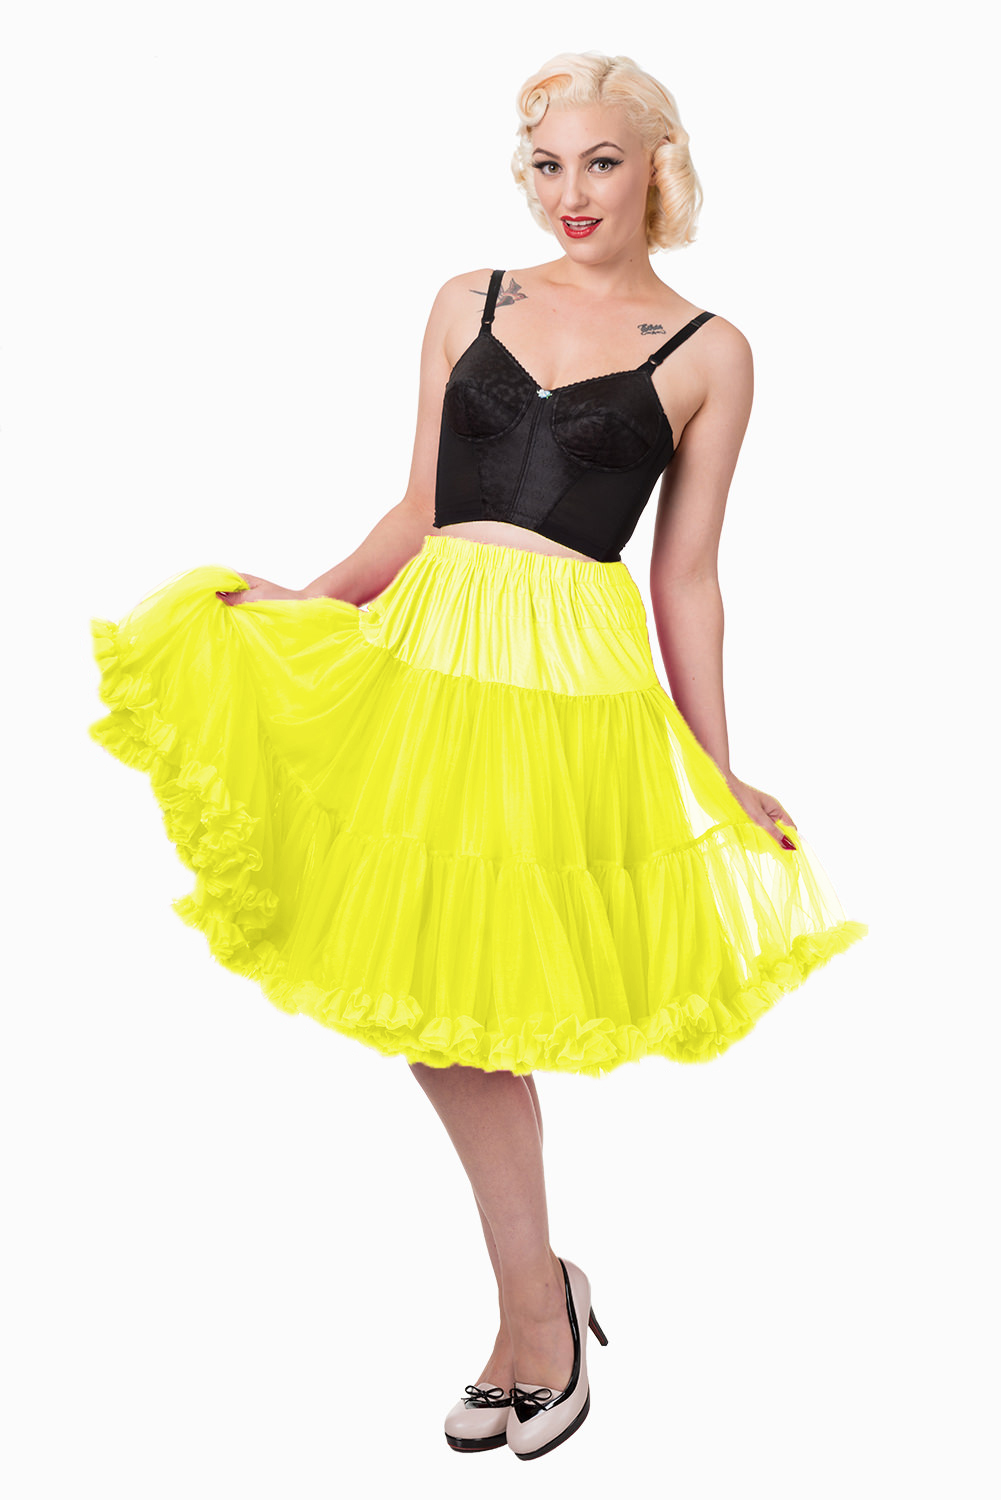 Banned Yellow Lifeforms Petticoat